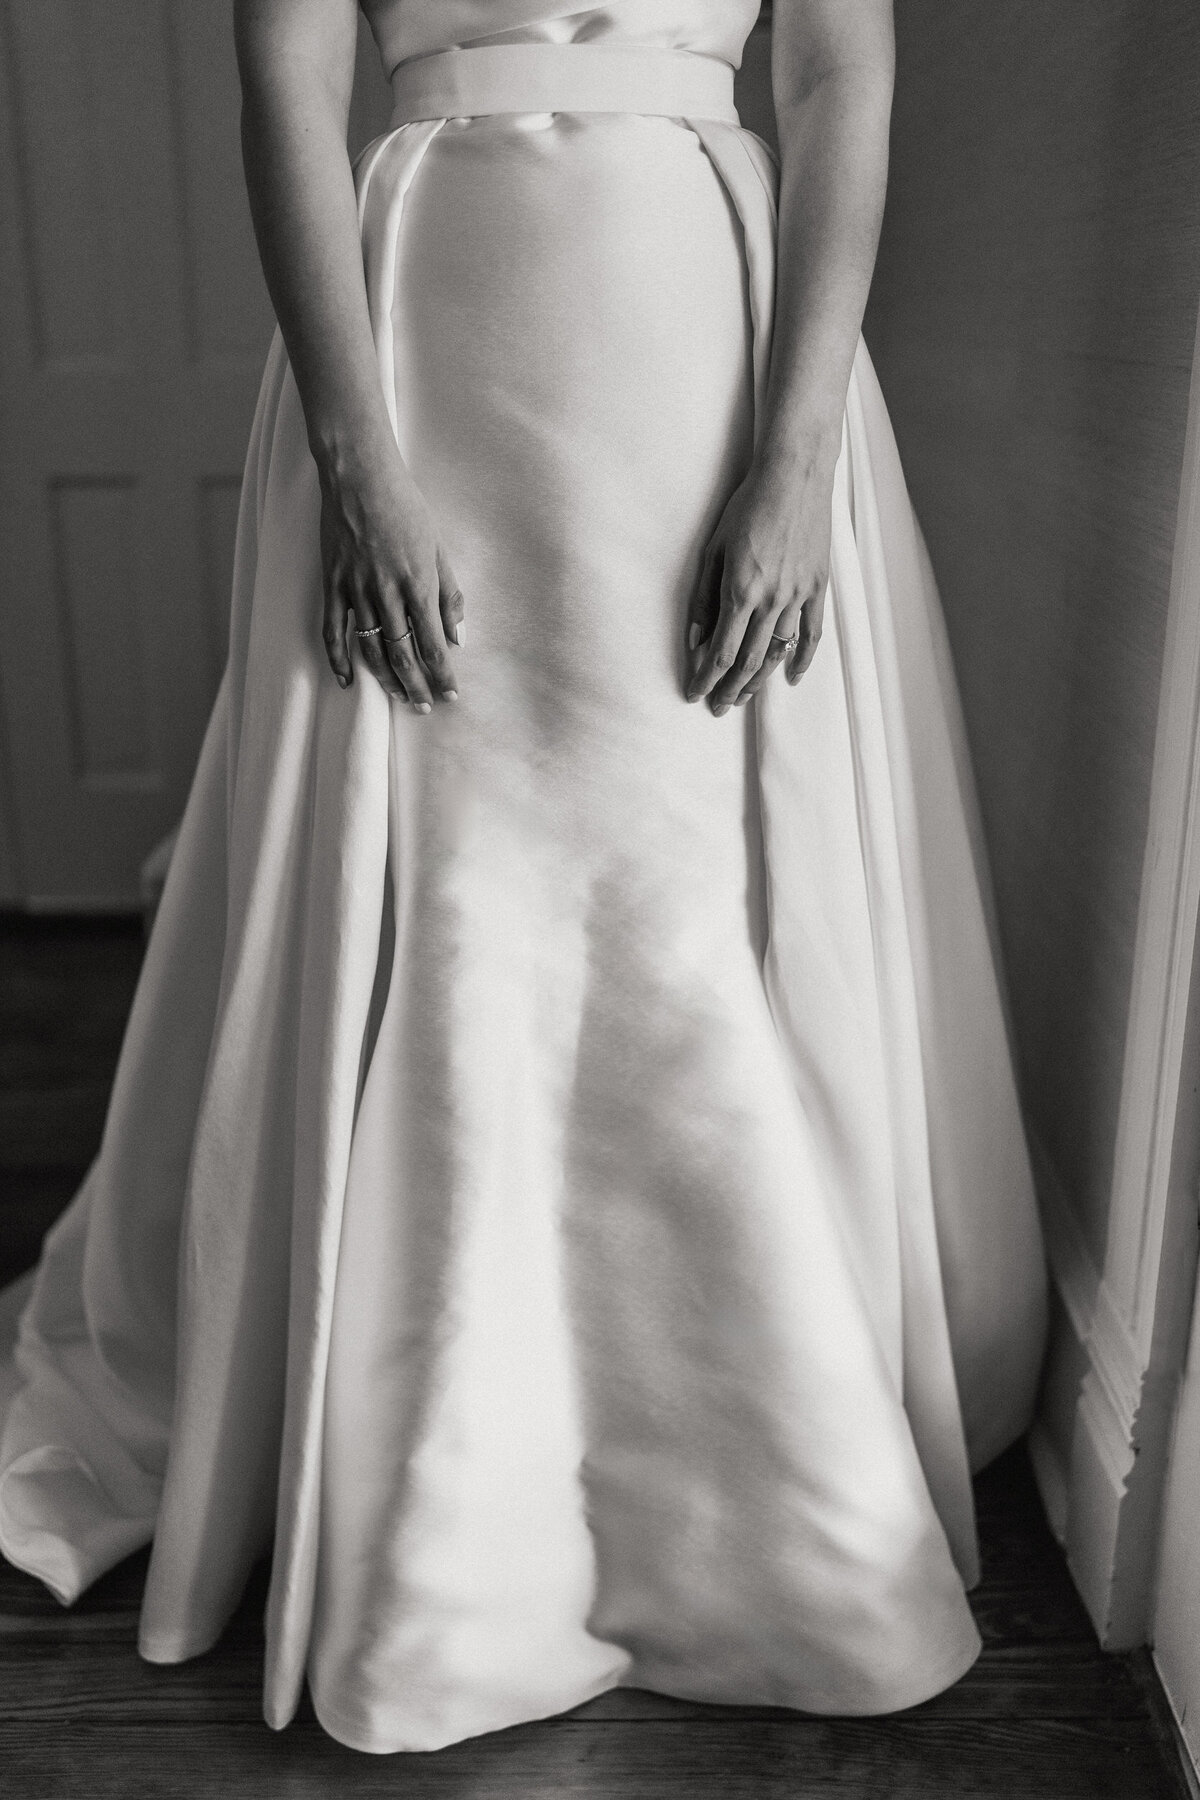 A black and white photograph of Ixi on her wedding day at Woodbine Mansion in Round Rock, near Austin, TX. The photograph is from the waist down showing the satin fabric of the bride’s wedding dress and the additional waist skirt that adds draping on both sides. Her hands are gently resting at her sides and the scene is beautifully lit by window light from the right. Wedding photography by Stacie McChesney/Vitae Weddings.